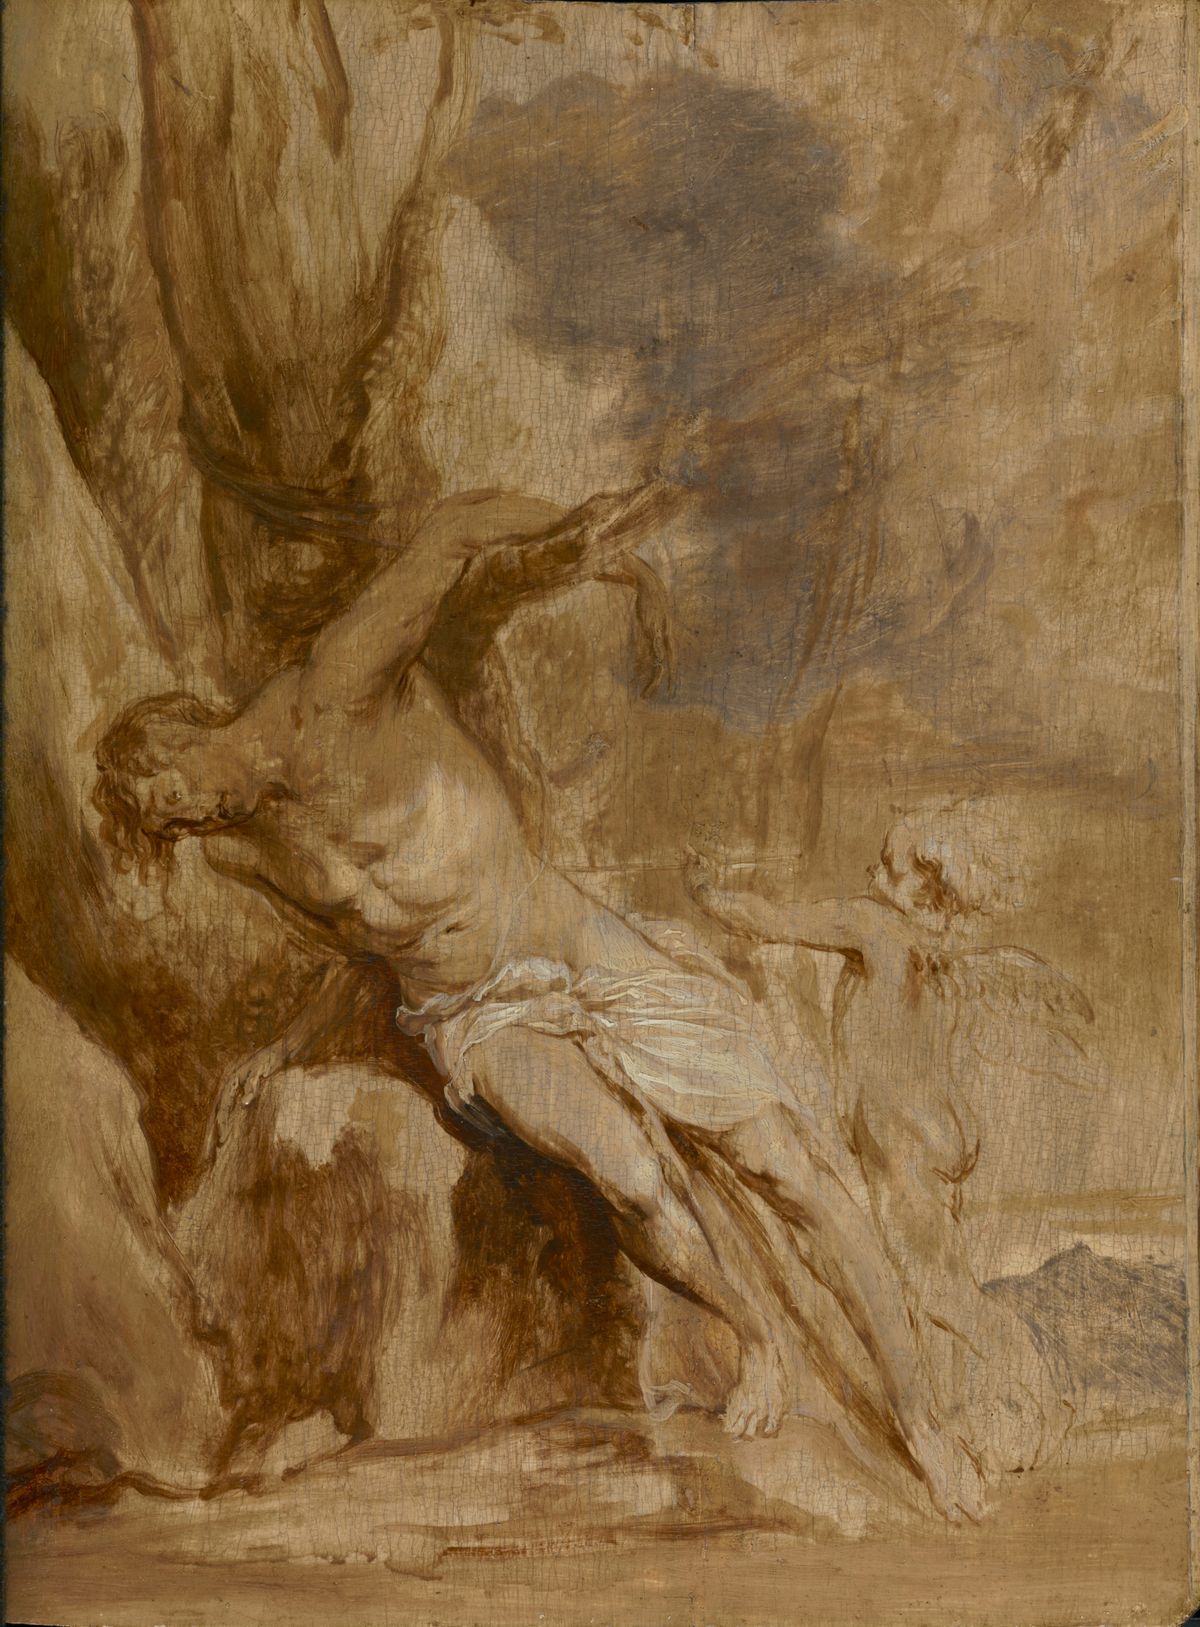 Saint Sebastian Tended by an Angel by Anthony van Dyck (about 1630–1632) - Public Domain Catholic Painting